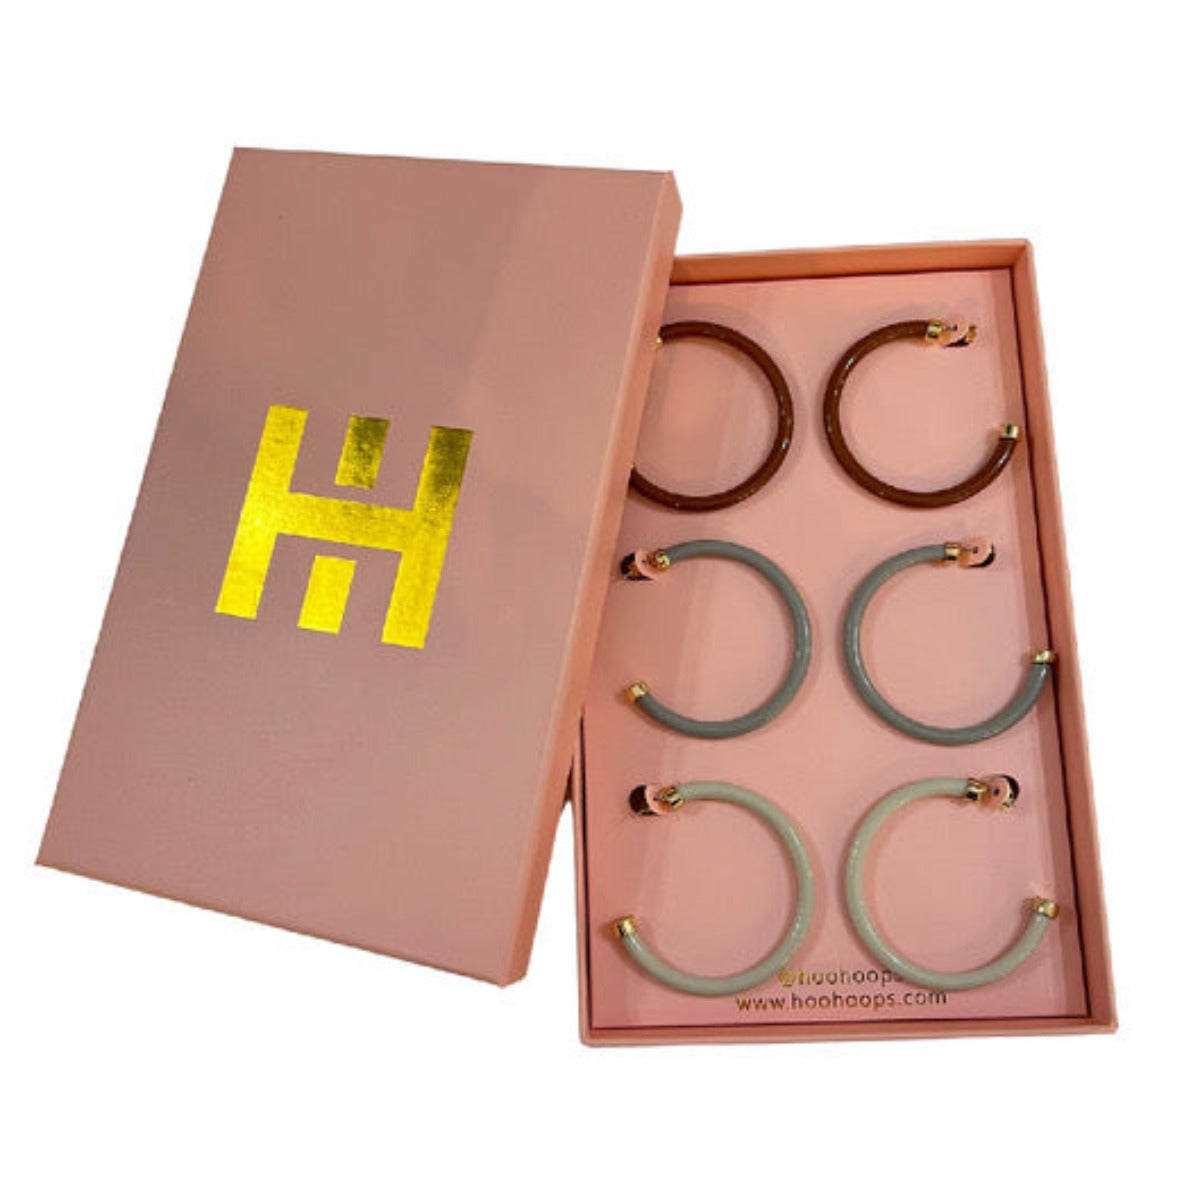 Limited Edition Hoo Hoops Party Sets